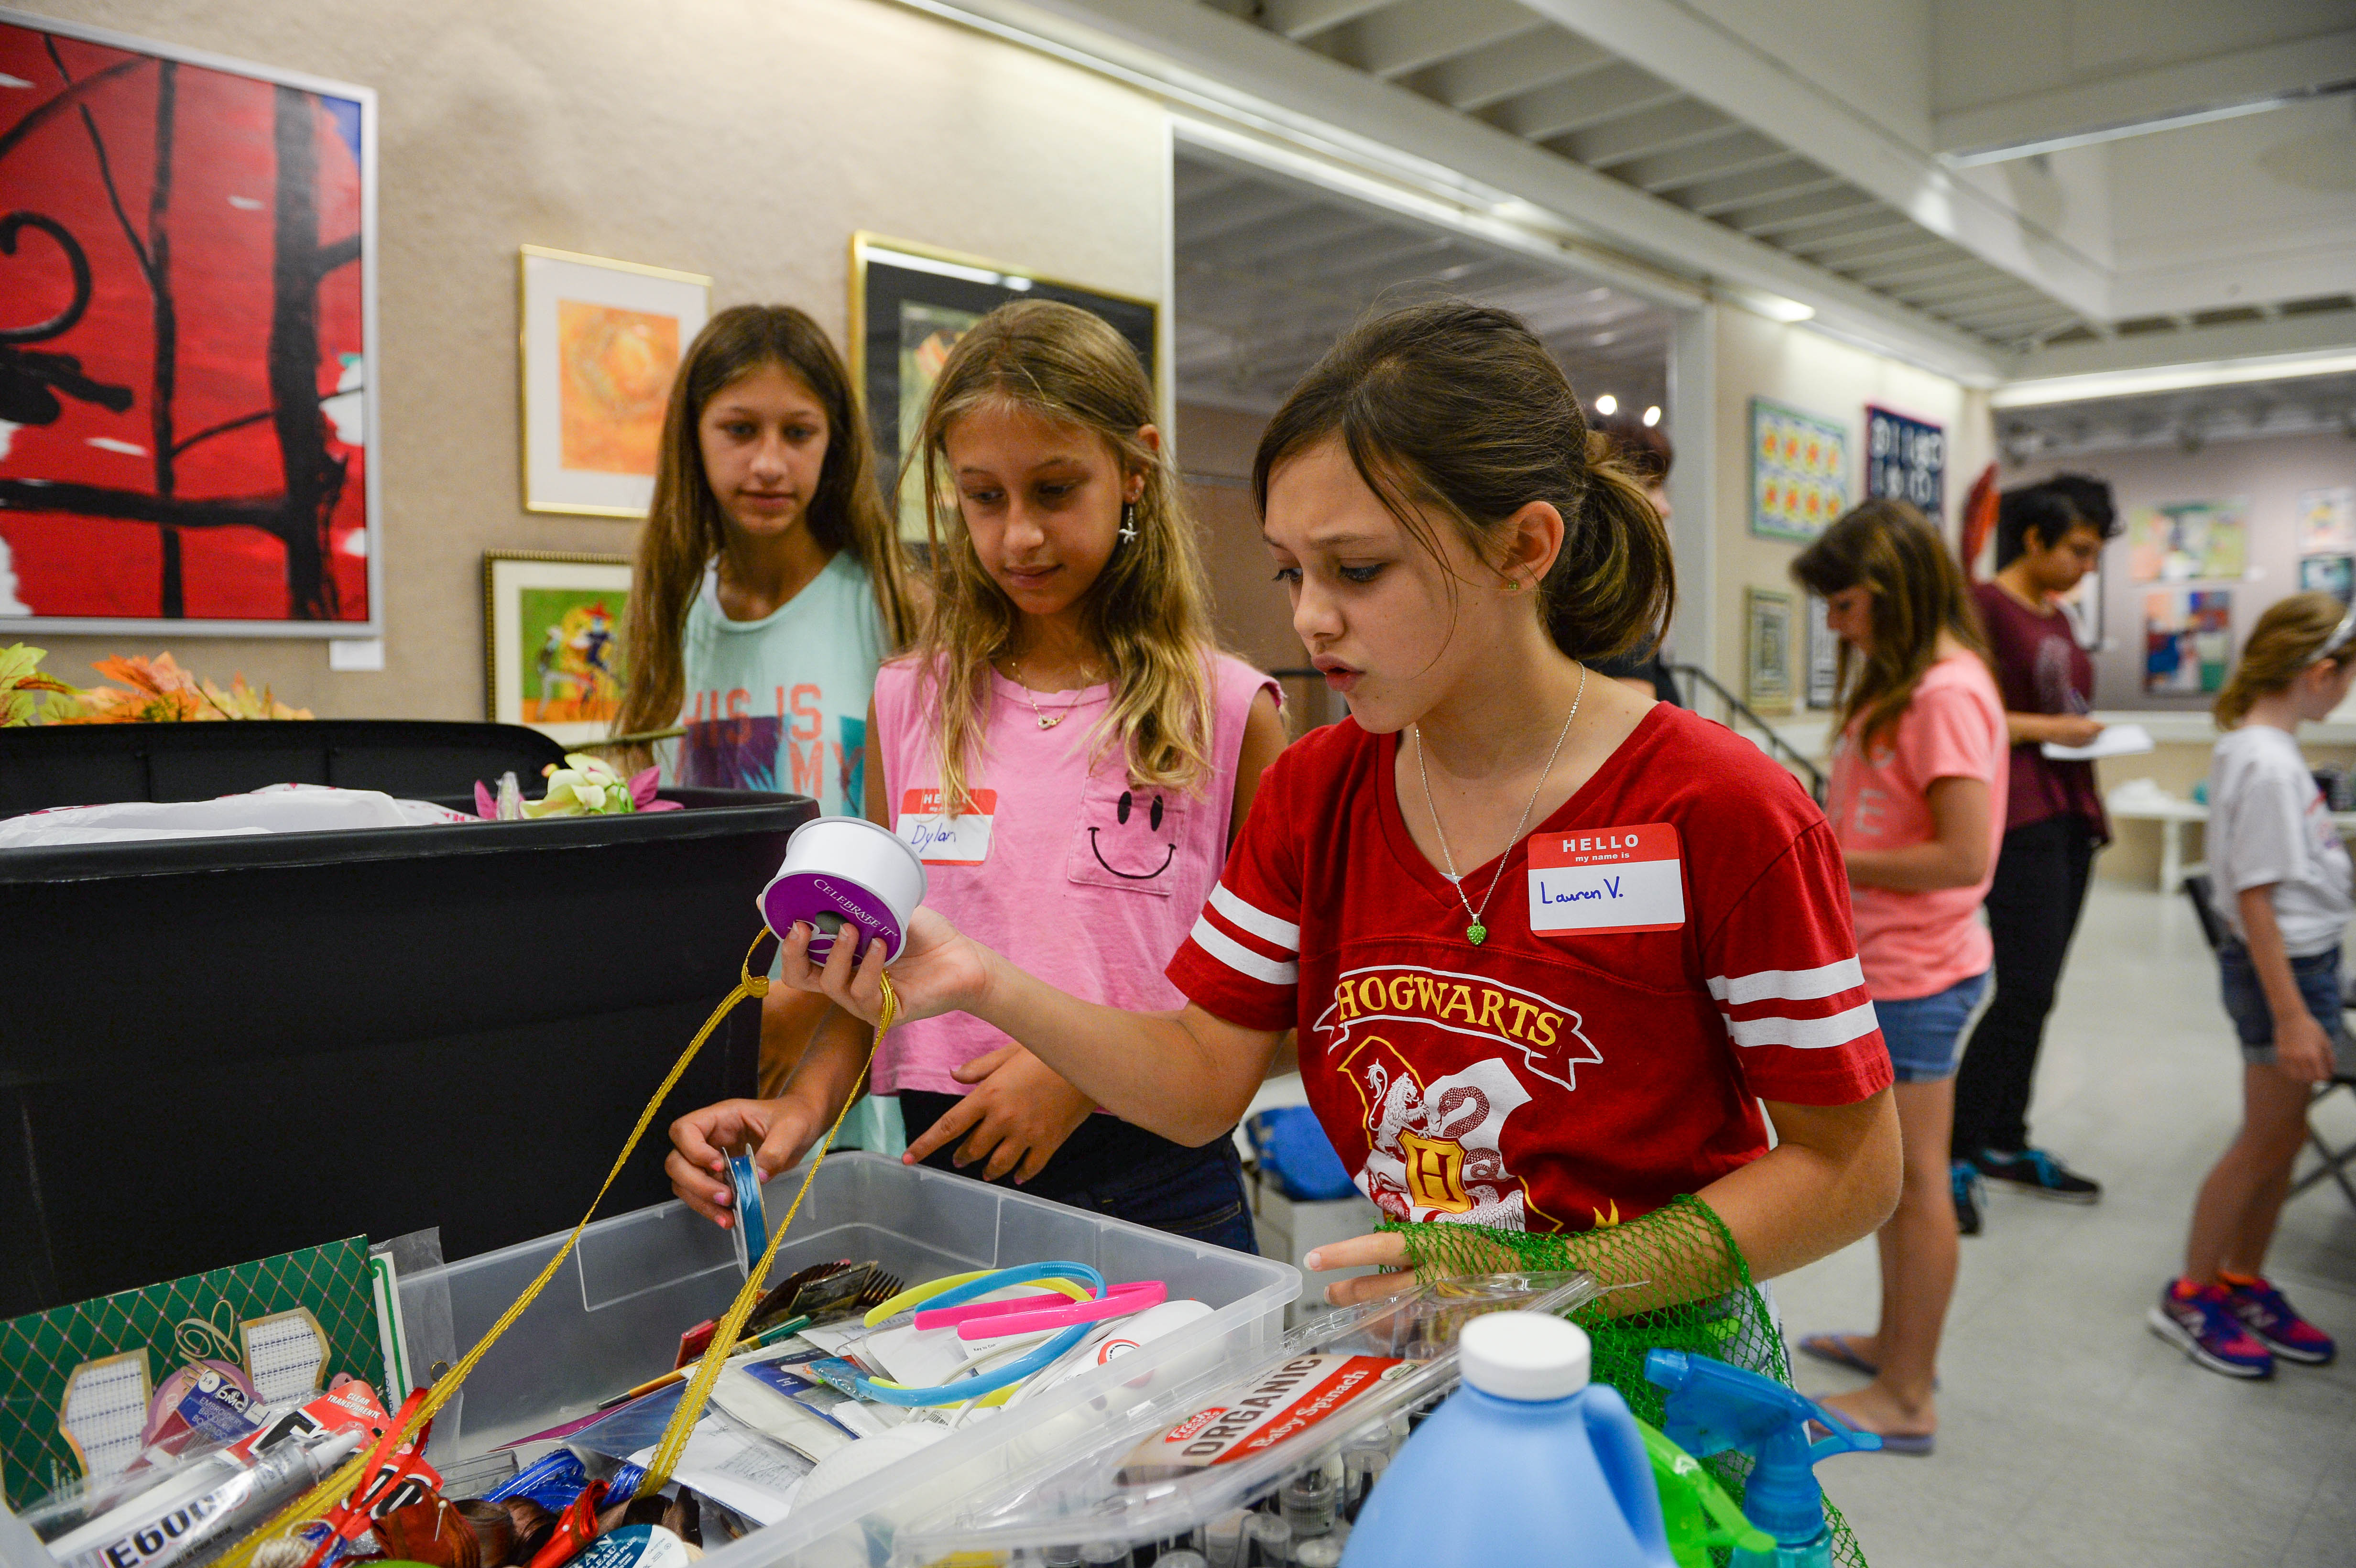 Madison Bierig, 14, Dylan Bierig, 11, and Lauren Van Nostrand, 11, look through boxes filled with a variety of supplies Monday, July 25 during Art Center Sarasota's iConcept Jr. summer camp. STAFF PHOTO / RACHEL S. O'HARA